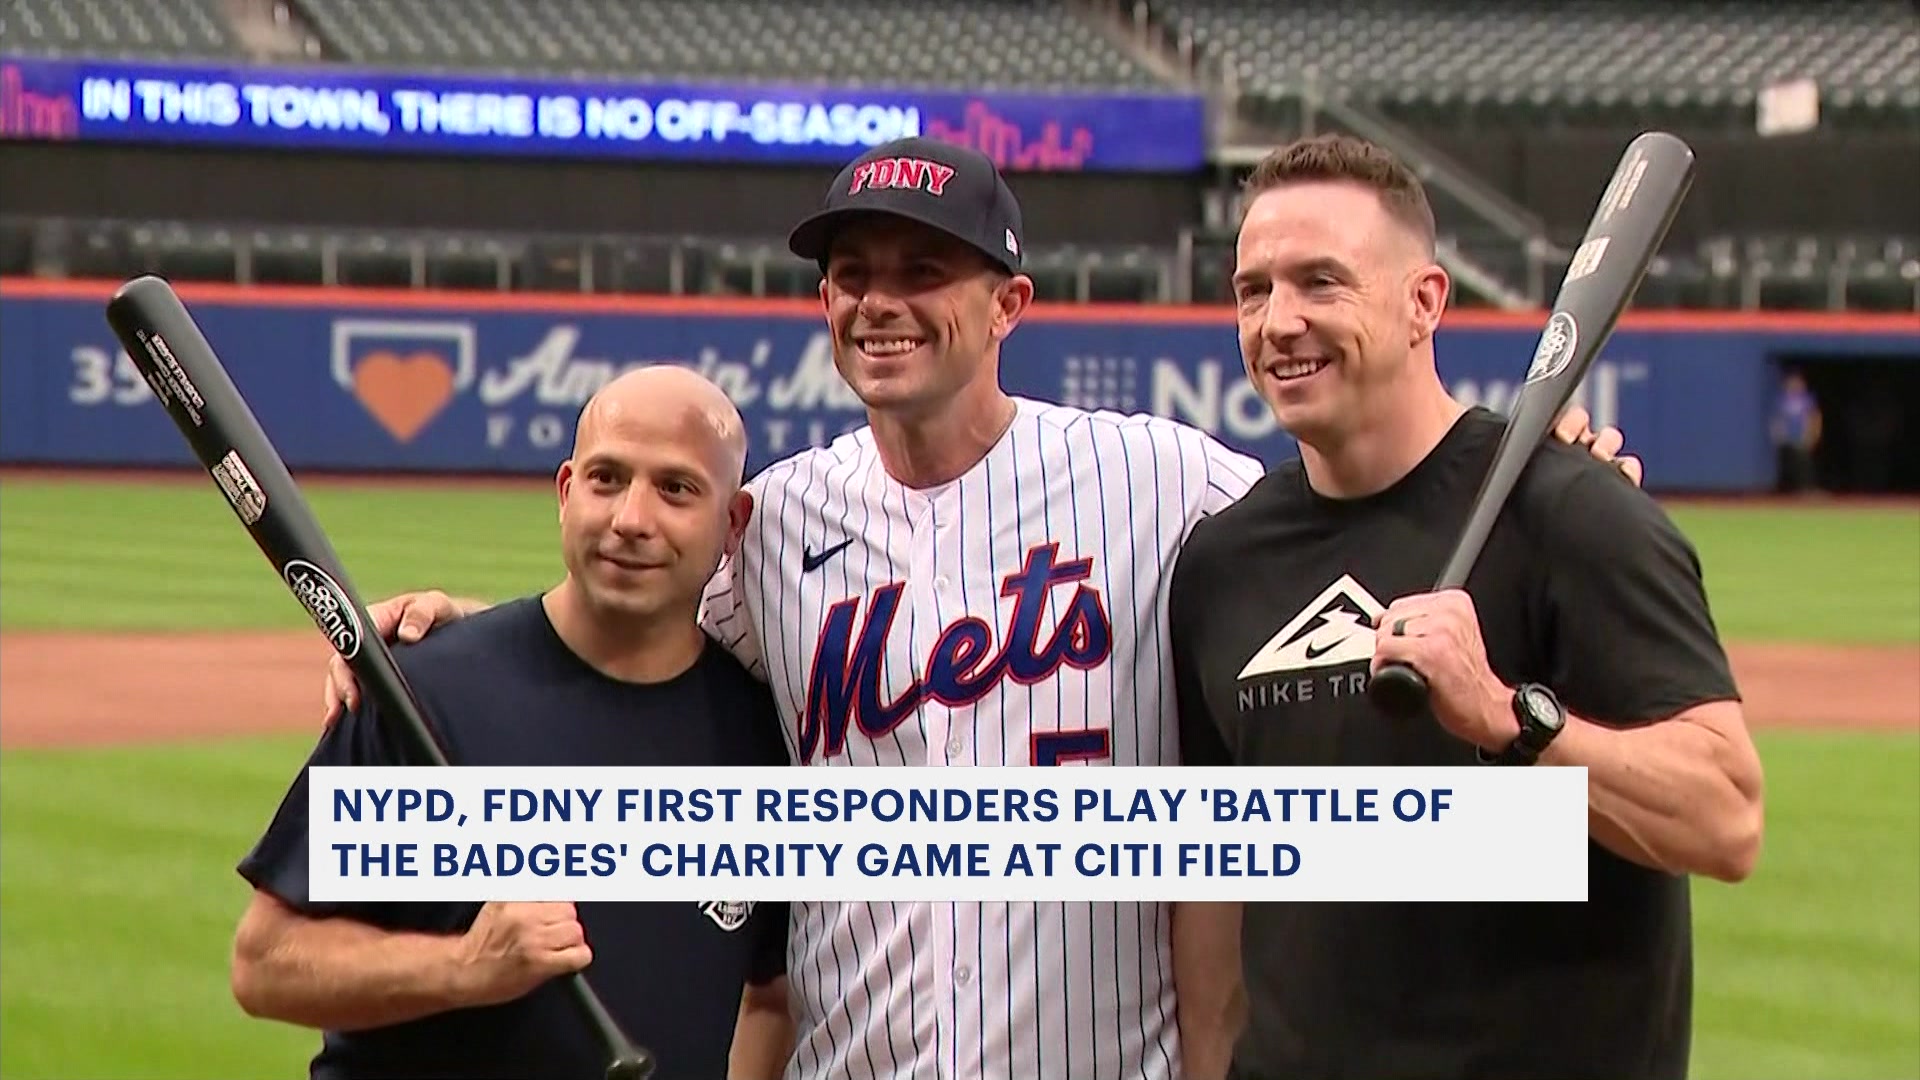 Video: Mets honor David Wright in his final game - NBC Sports